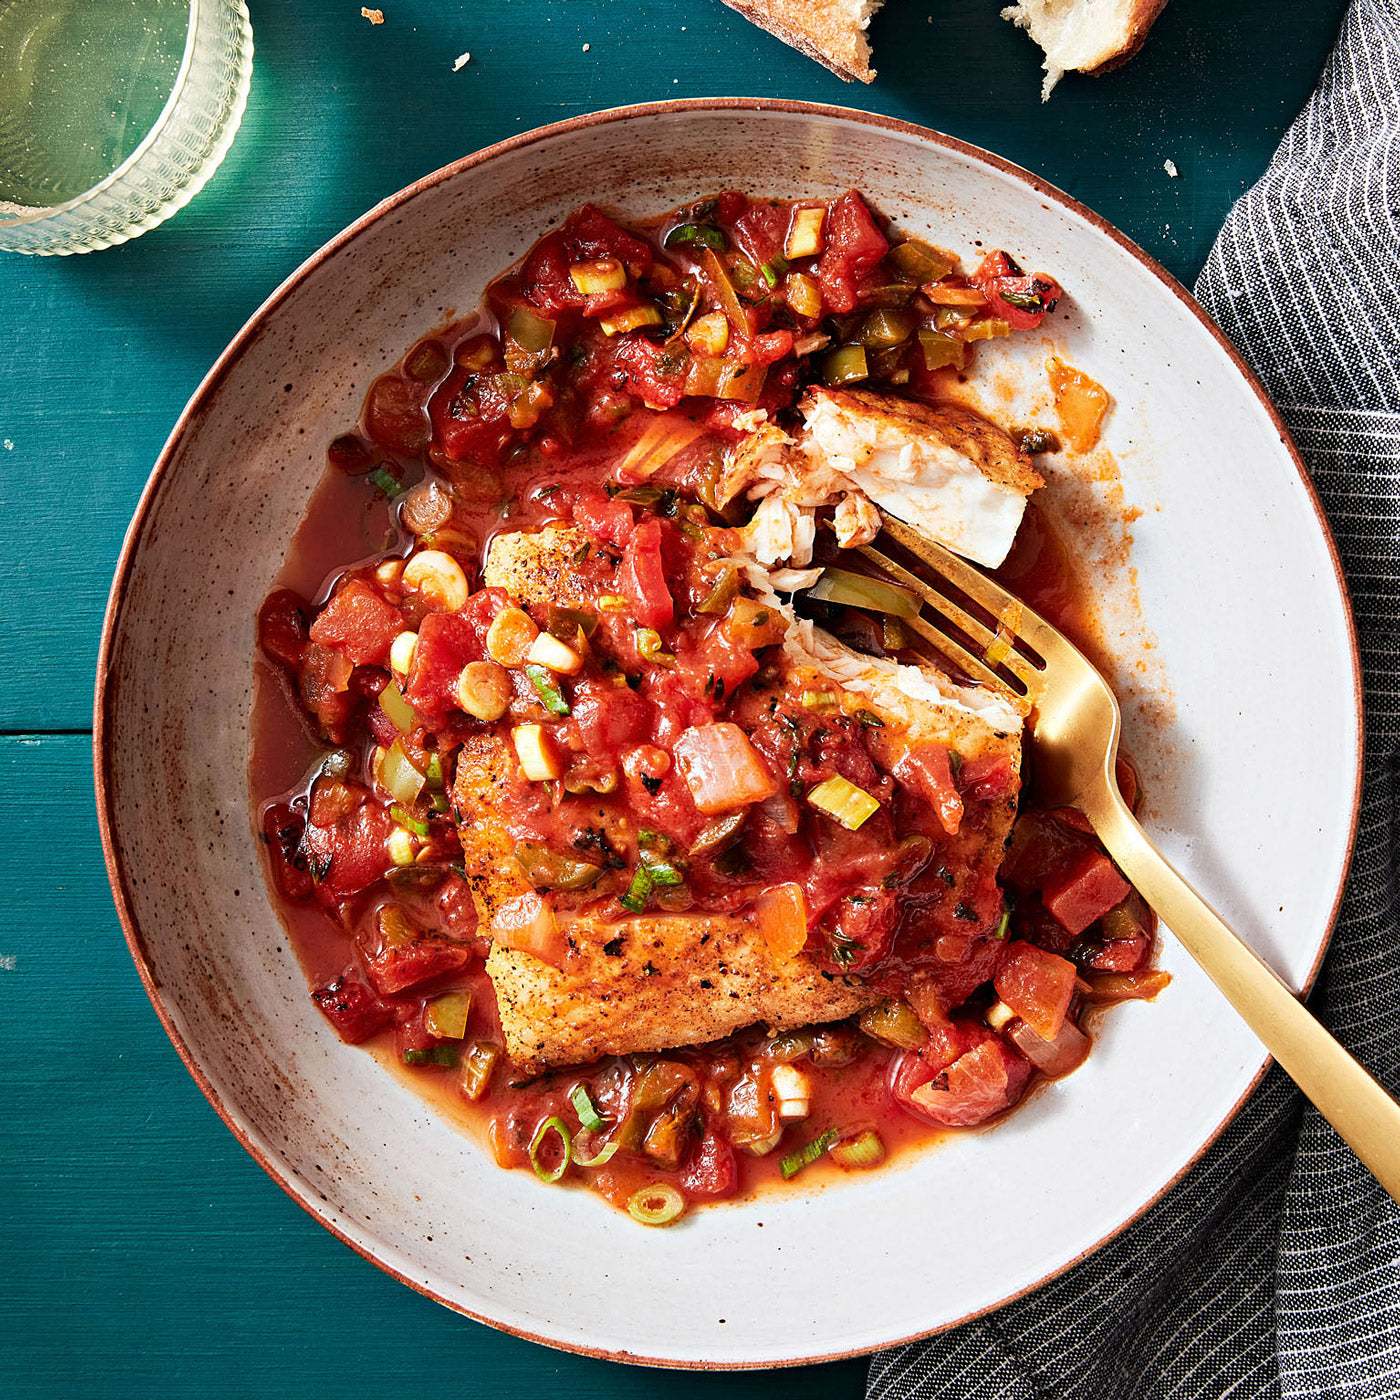 Rachael Ray's Halibut or Chicken with Creole Sauce